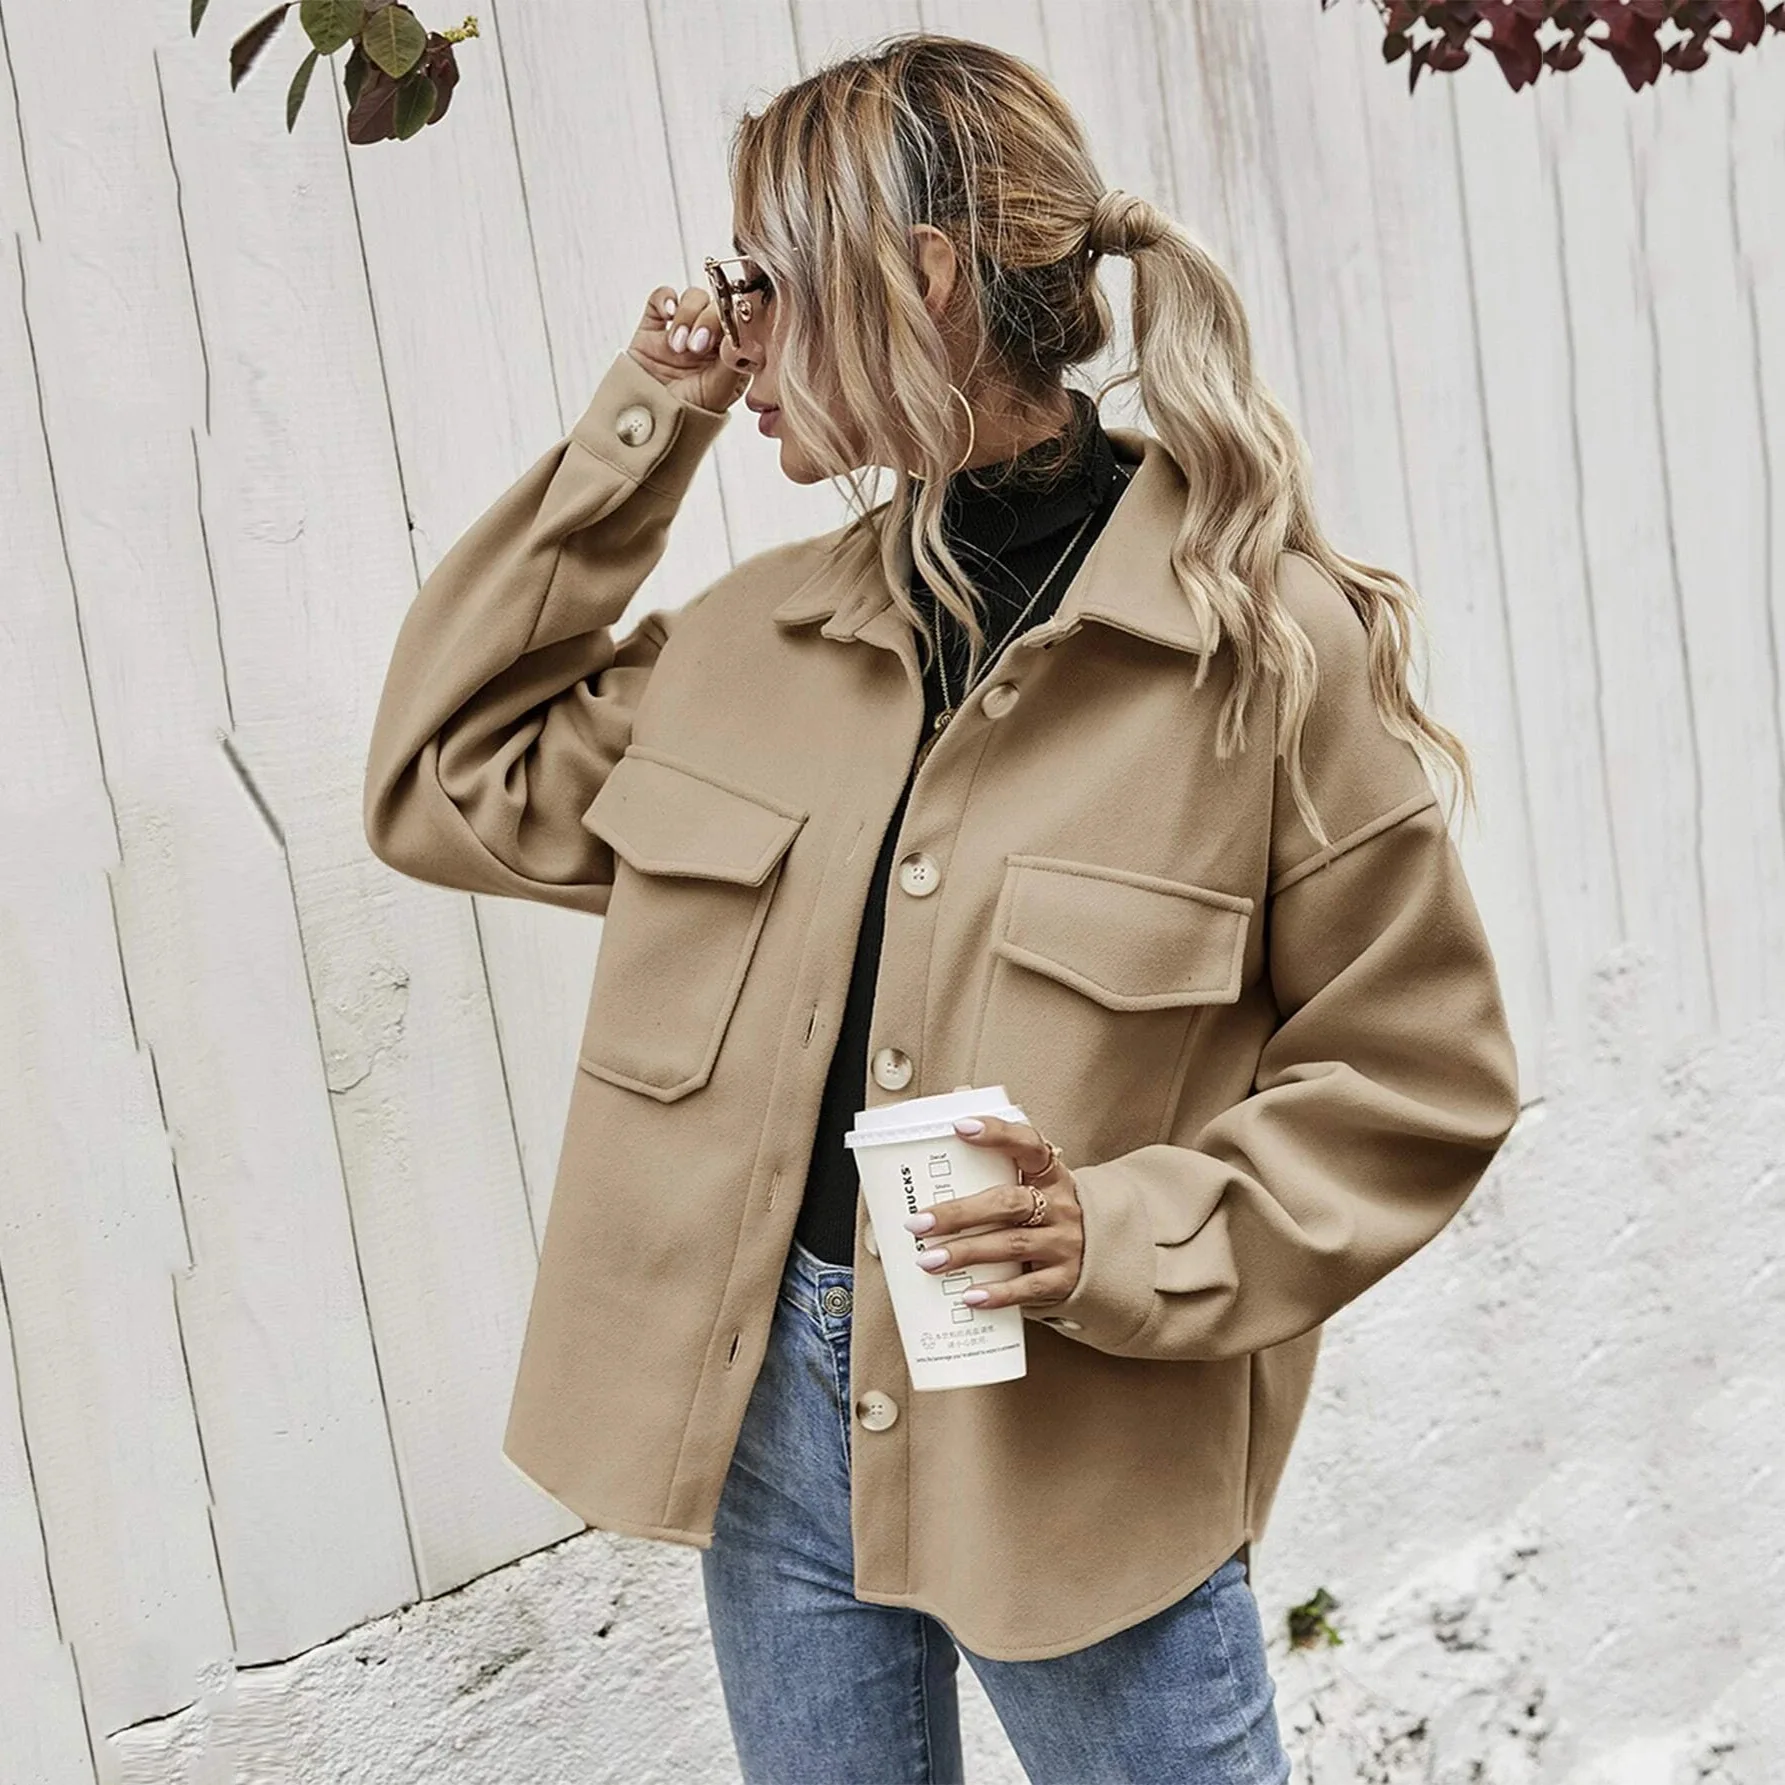 

Wepbel Solid Color Shirt Woolen Baggy Coat Autumn Jackets Lapels Single-Breasted Thickened Fashion Women Outwear Outwear